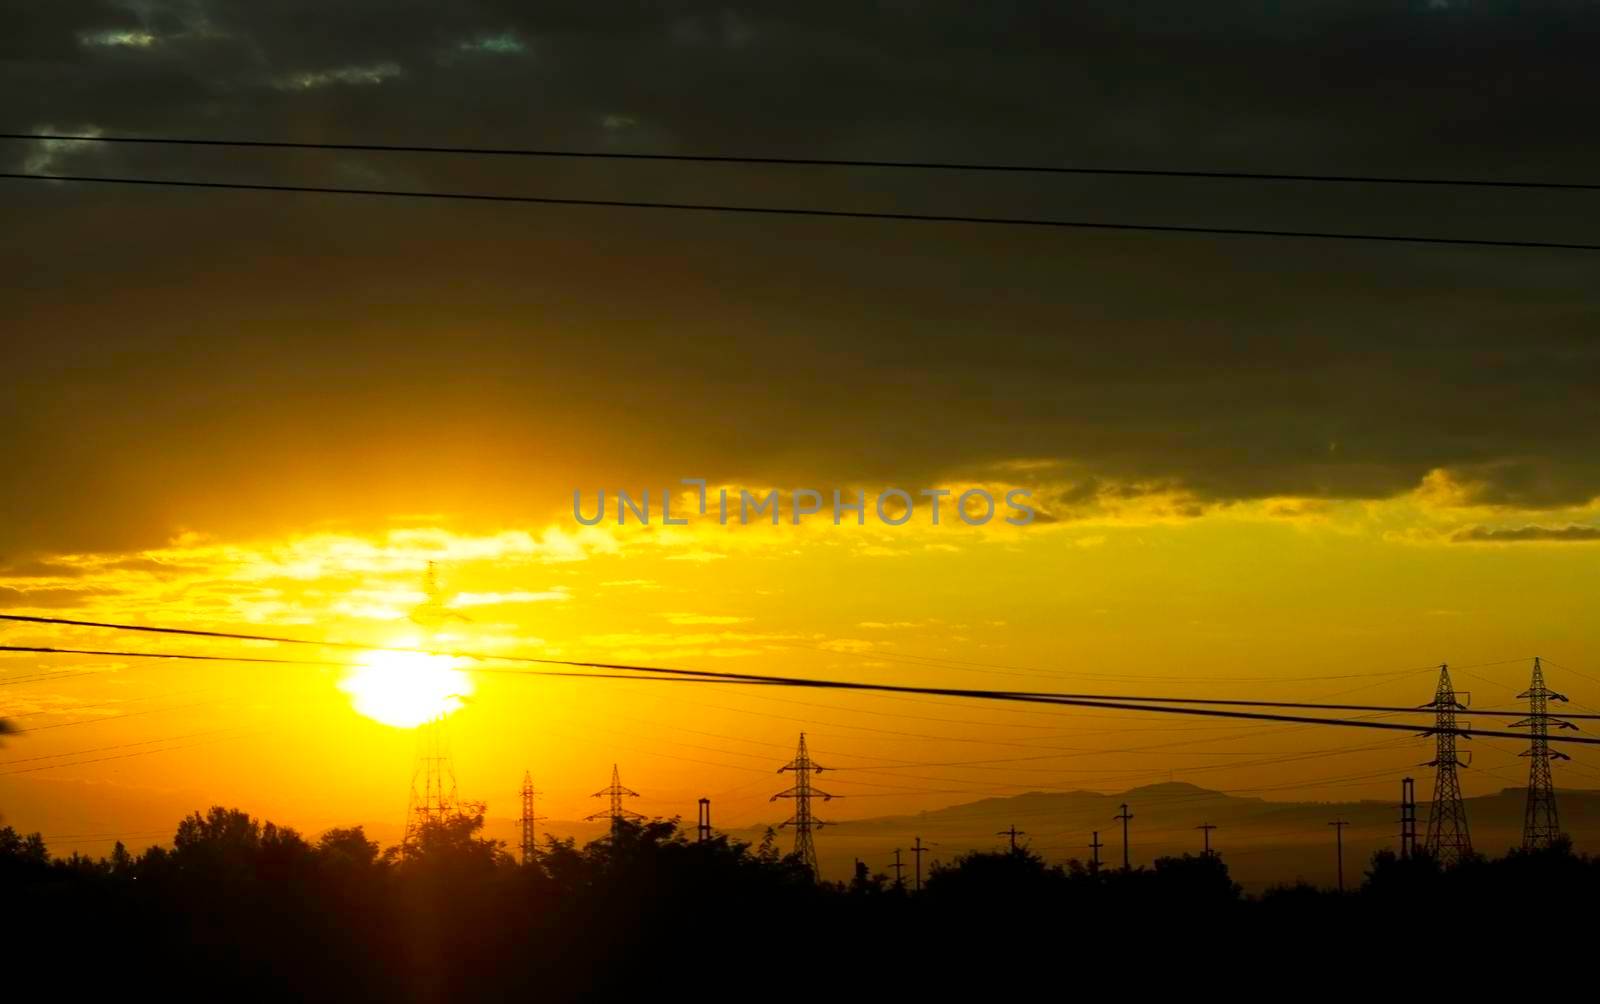 High voltage power lines in the sunrise